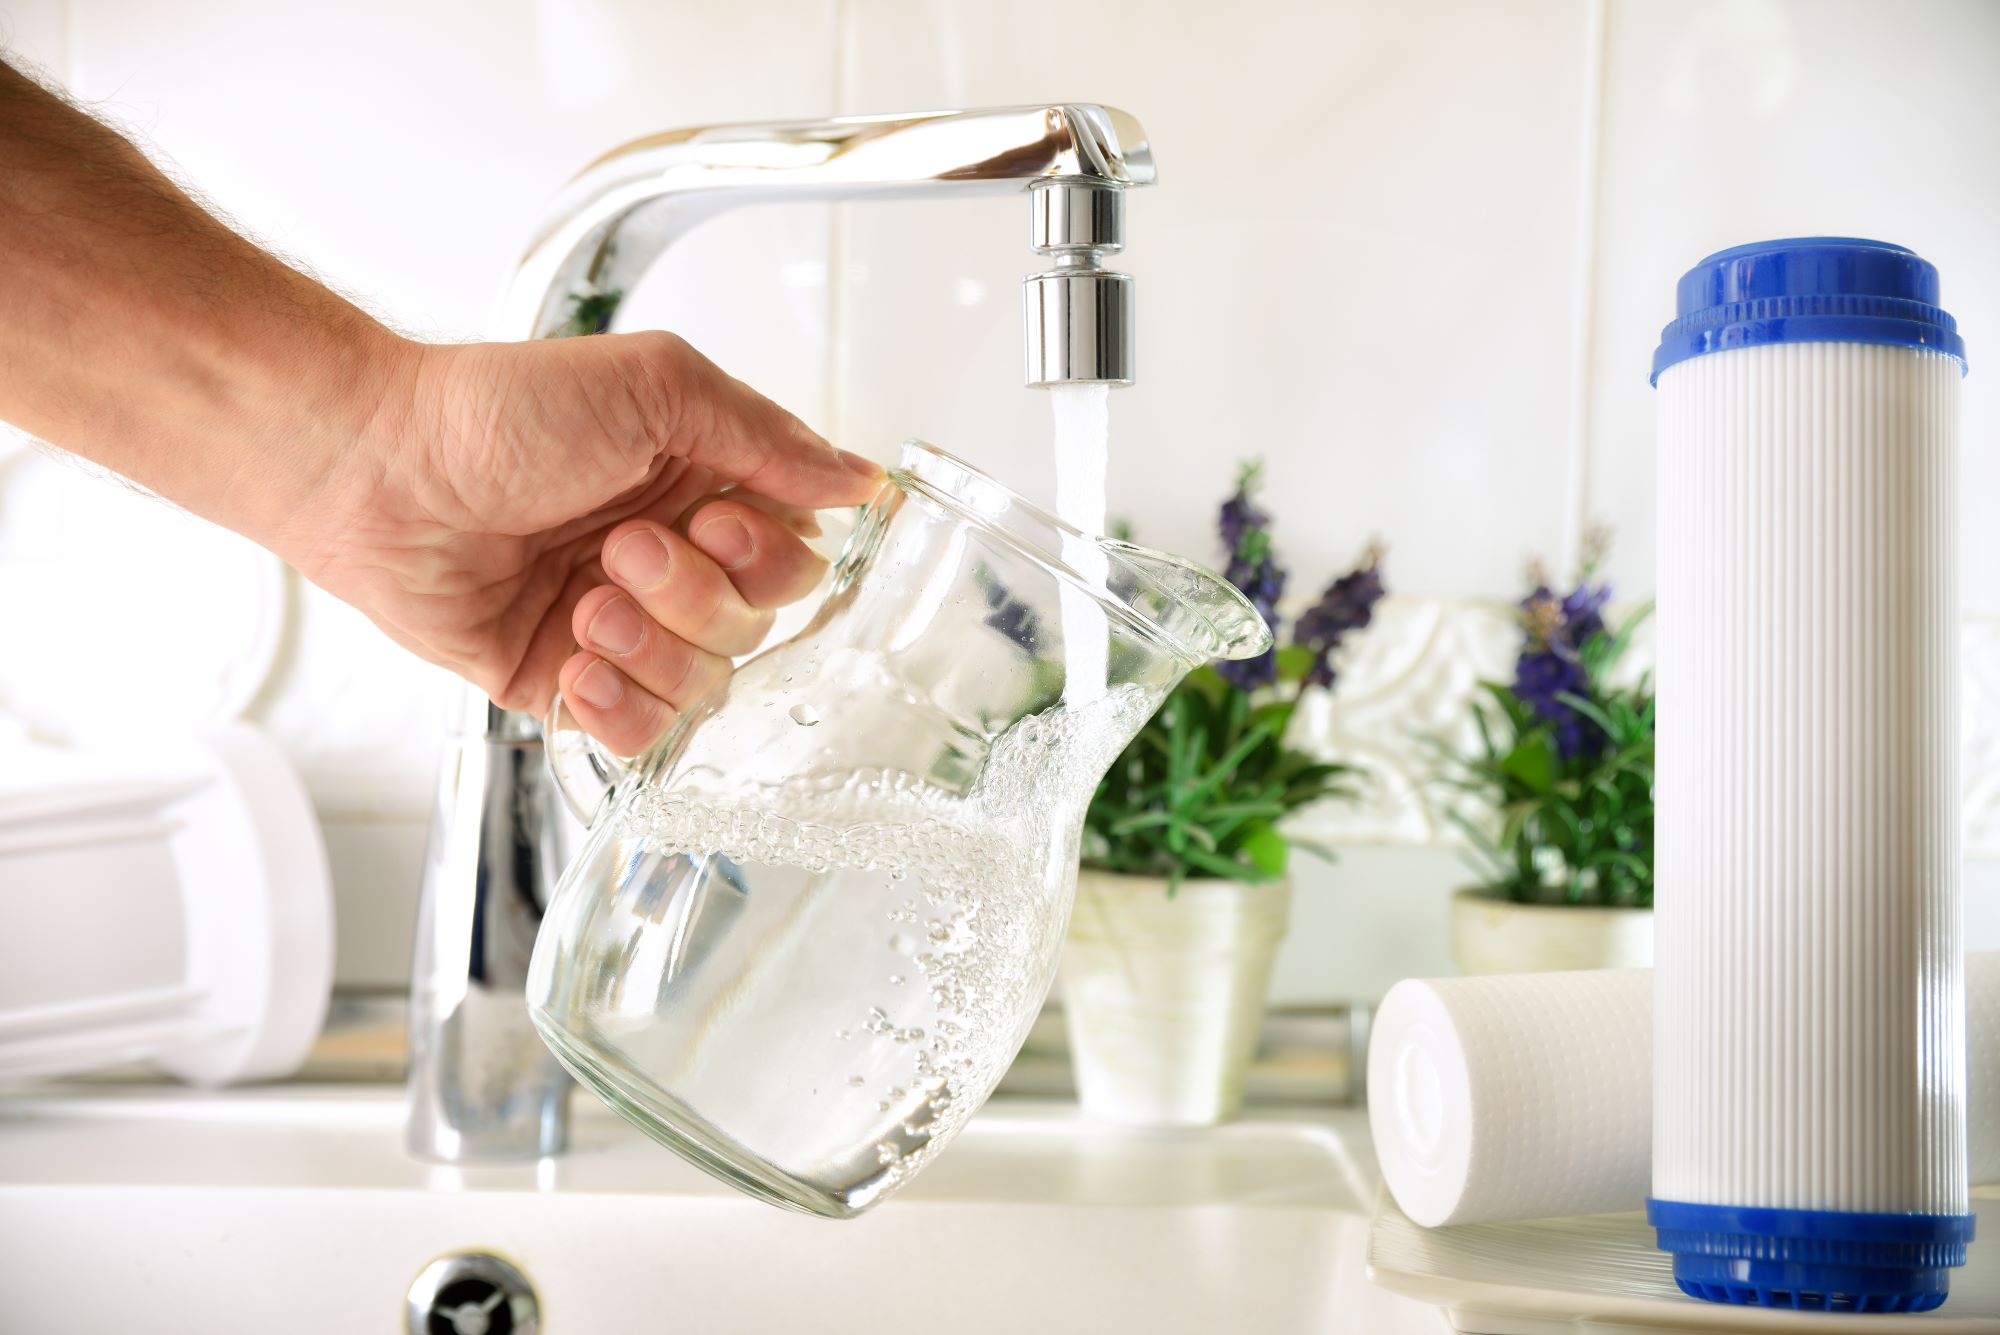 Ways To Improve Water Quality At Home